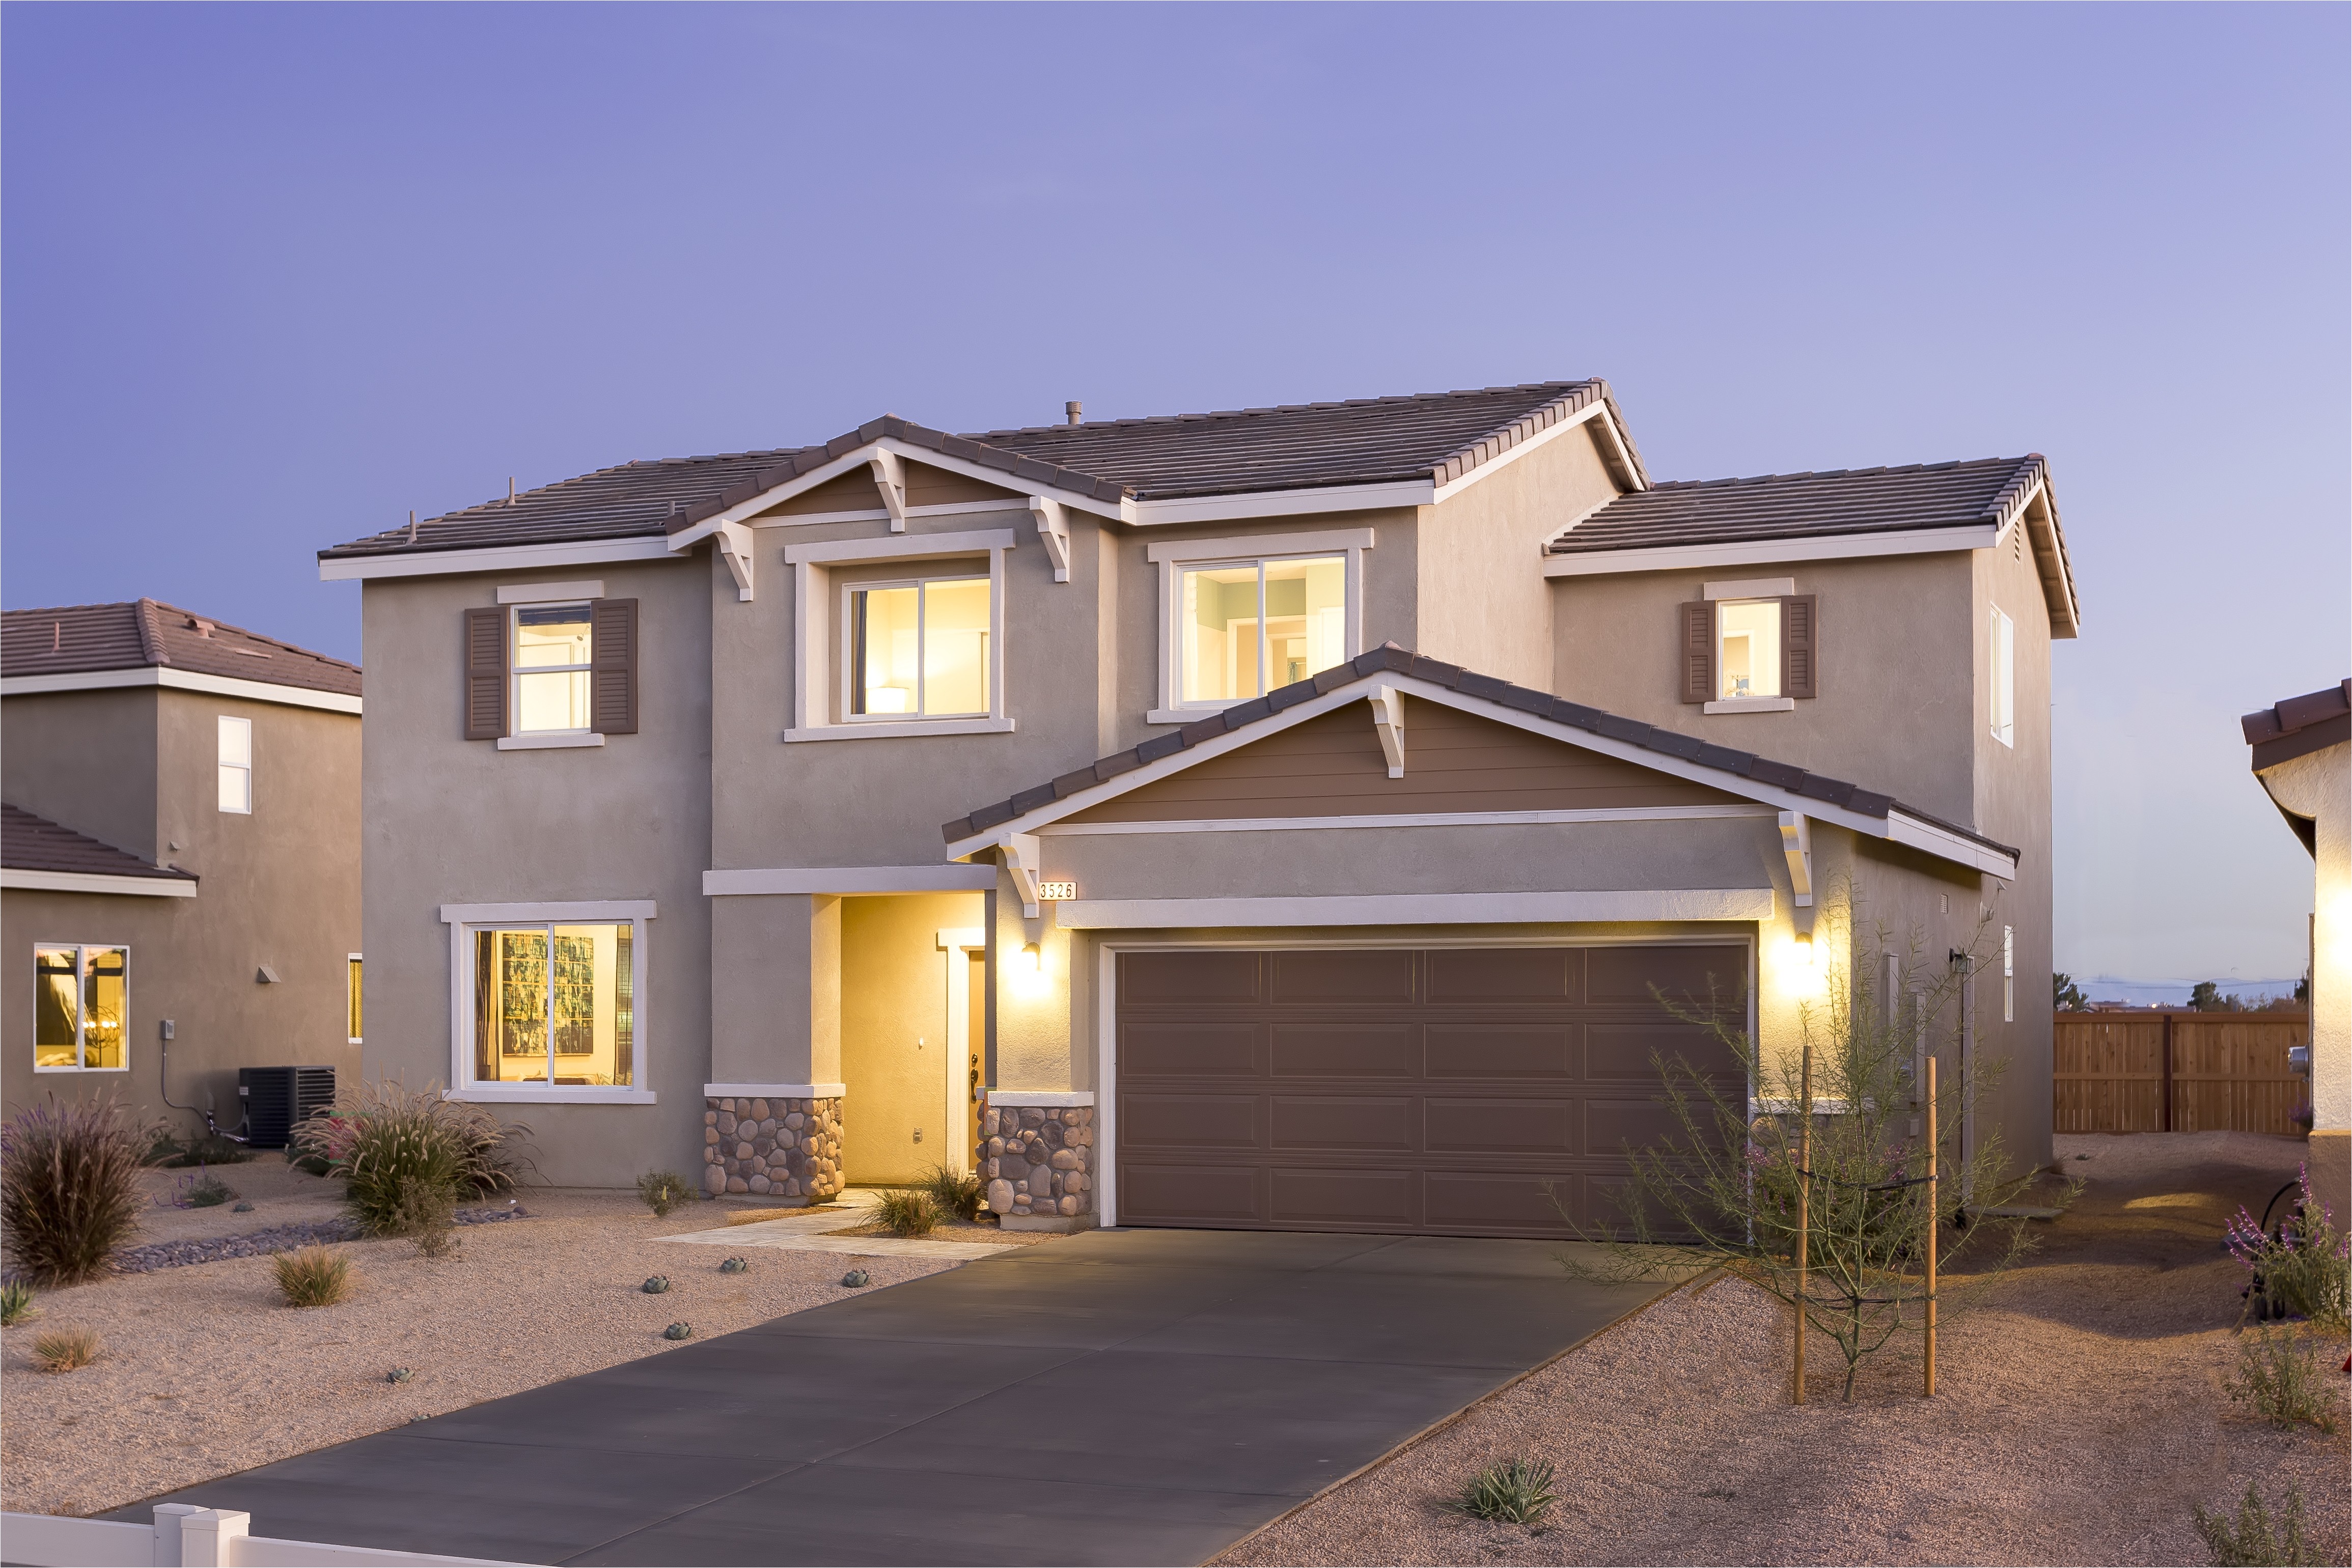 new homes search home builders and new homes for sale new homes in tehachapi ca 4 communities newhomesource